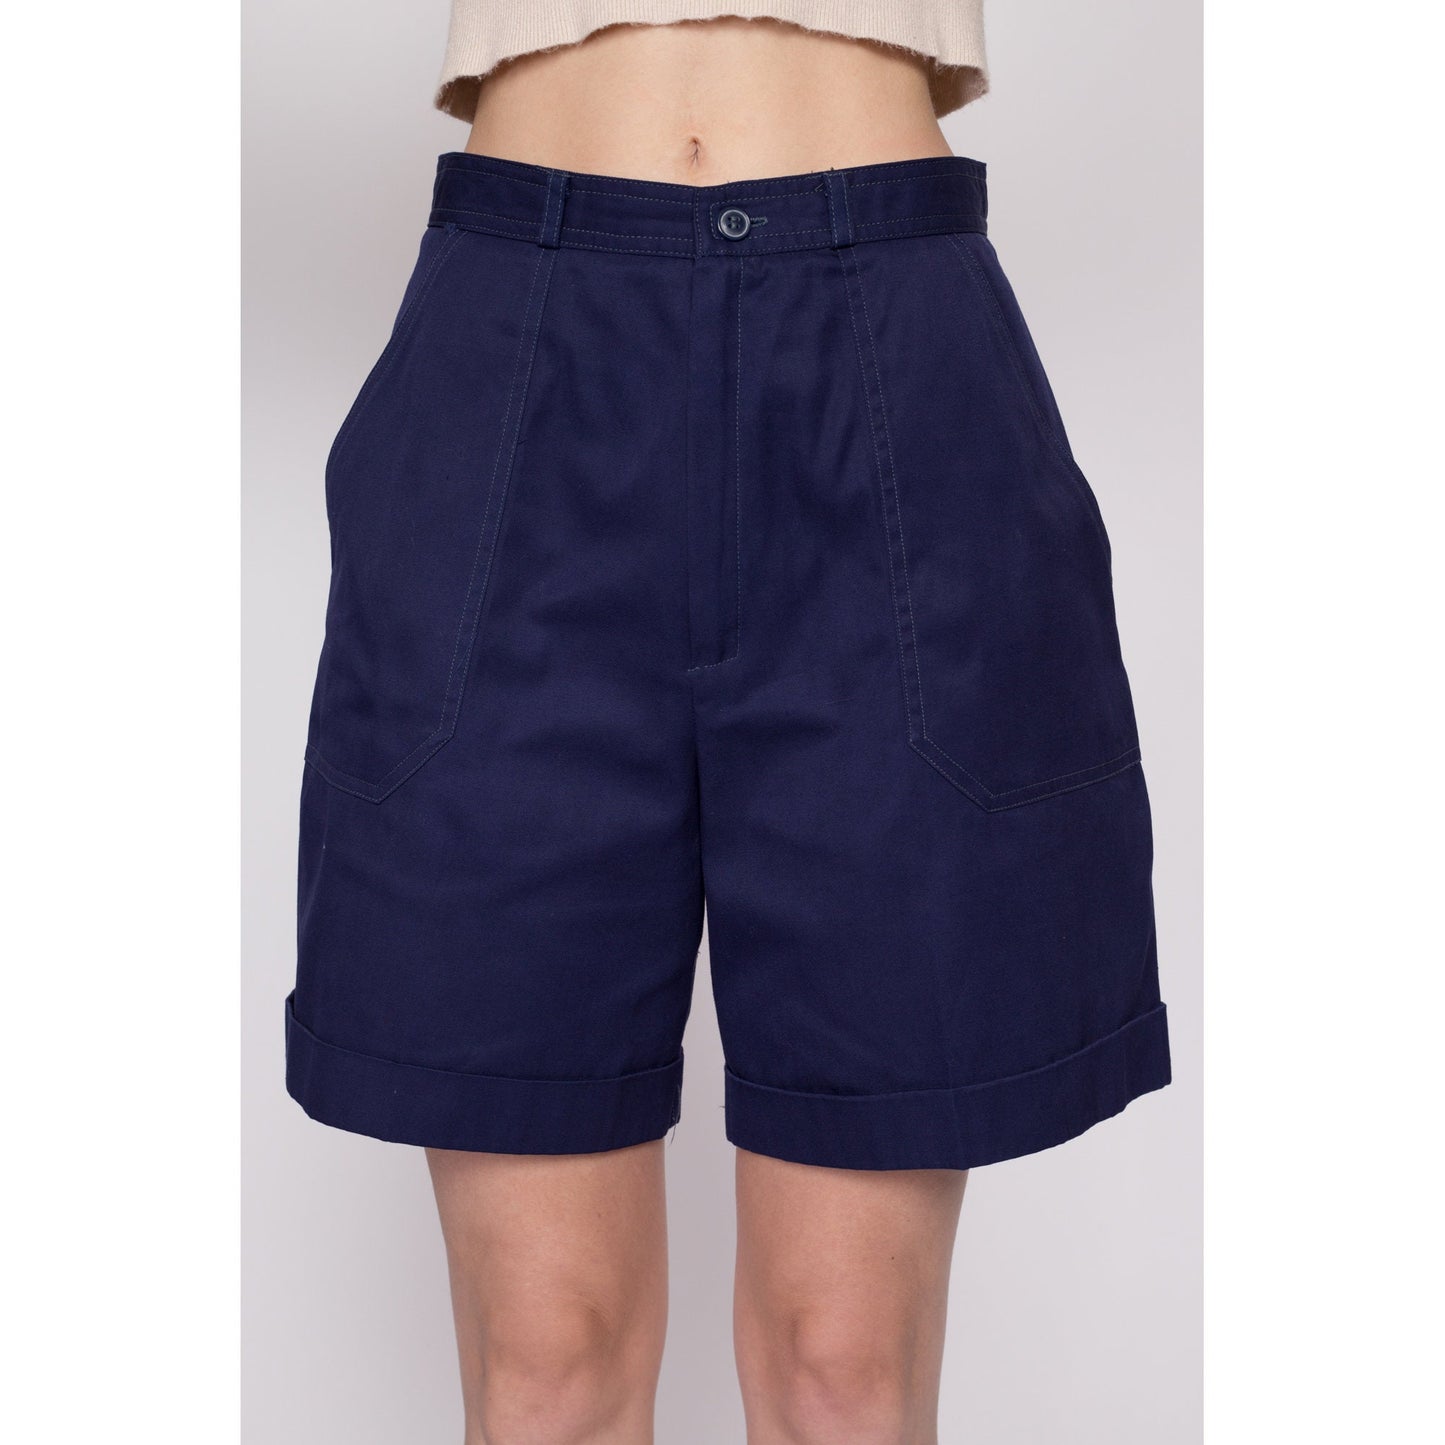 Small 80s High Waisted Navy Blue Pleated Shorts 27" | Vintage Casual Plain Cuffed Shorts